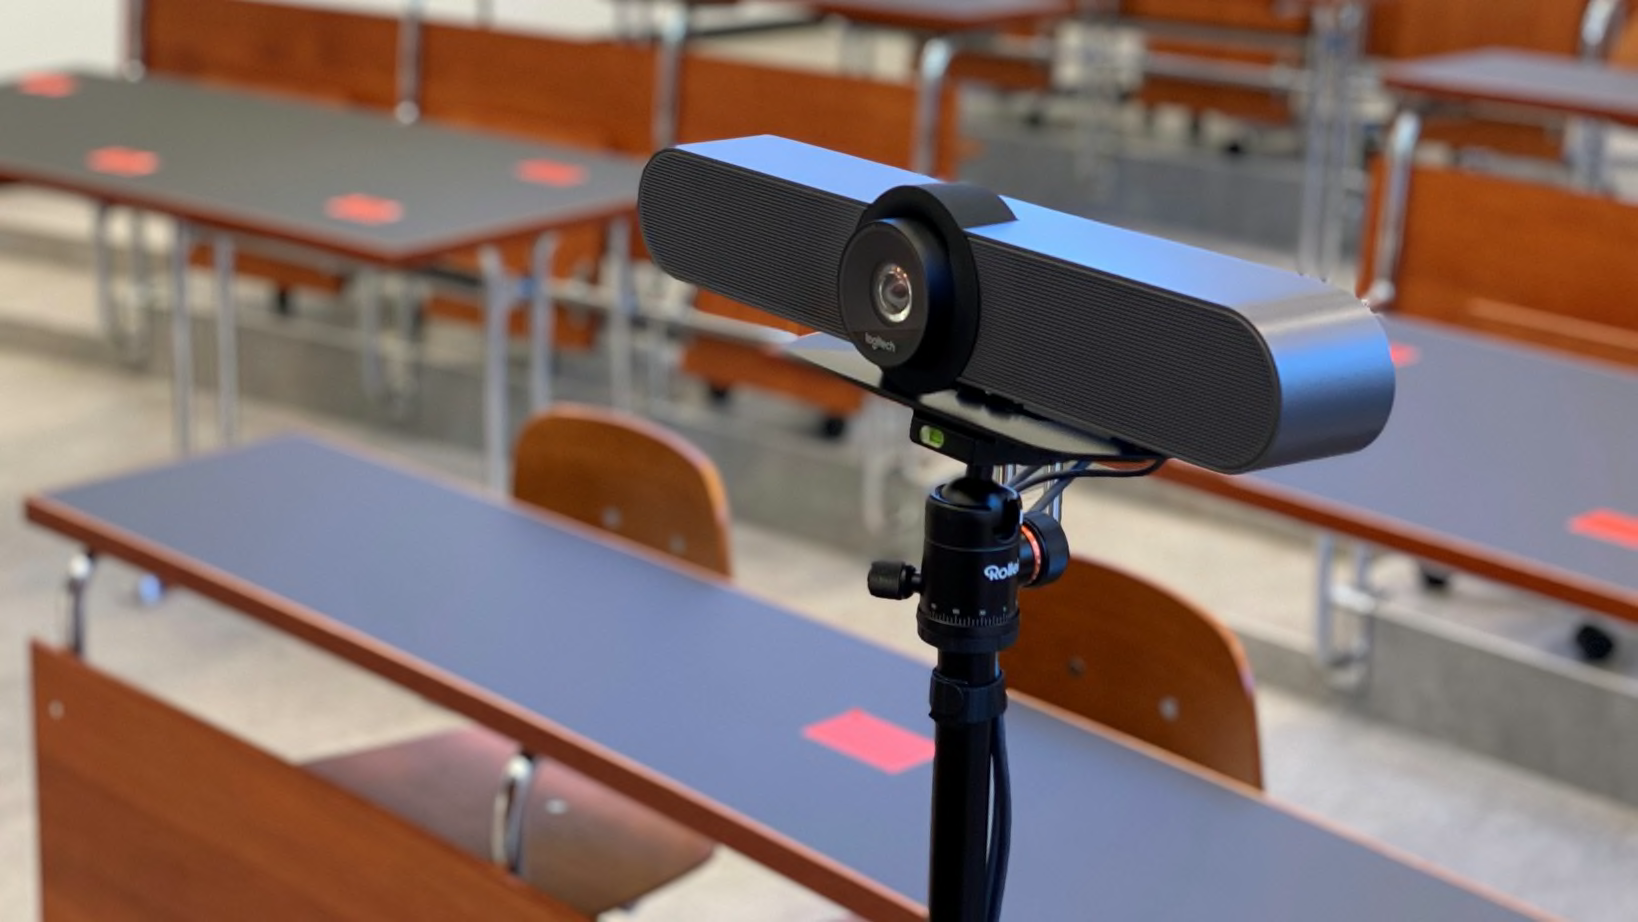 Digital lectures via video conferencing complement face-to-face teaching with minimal staffing